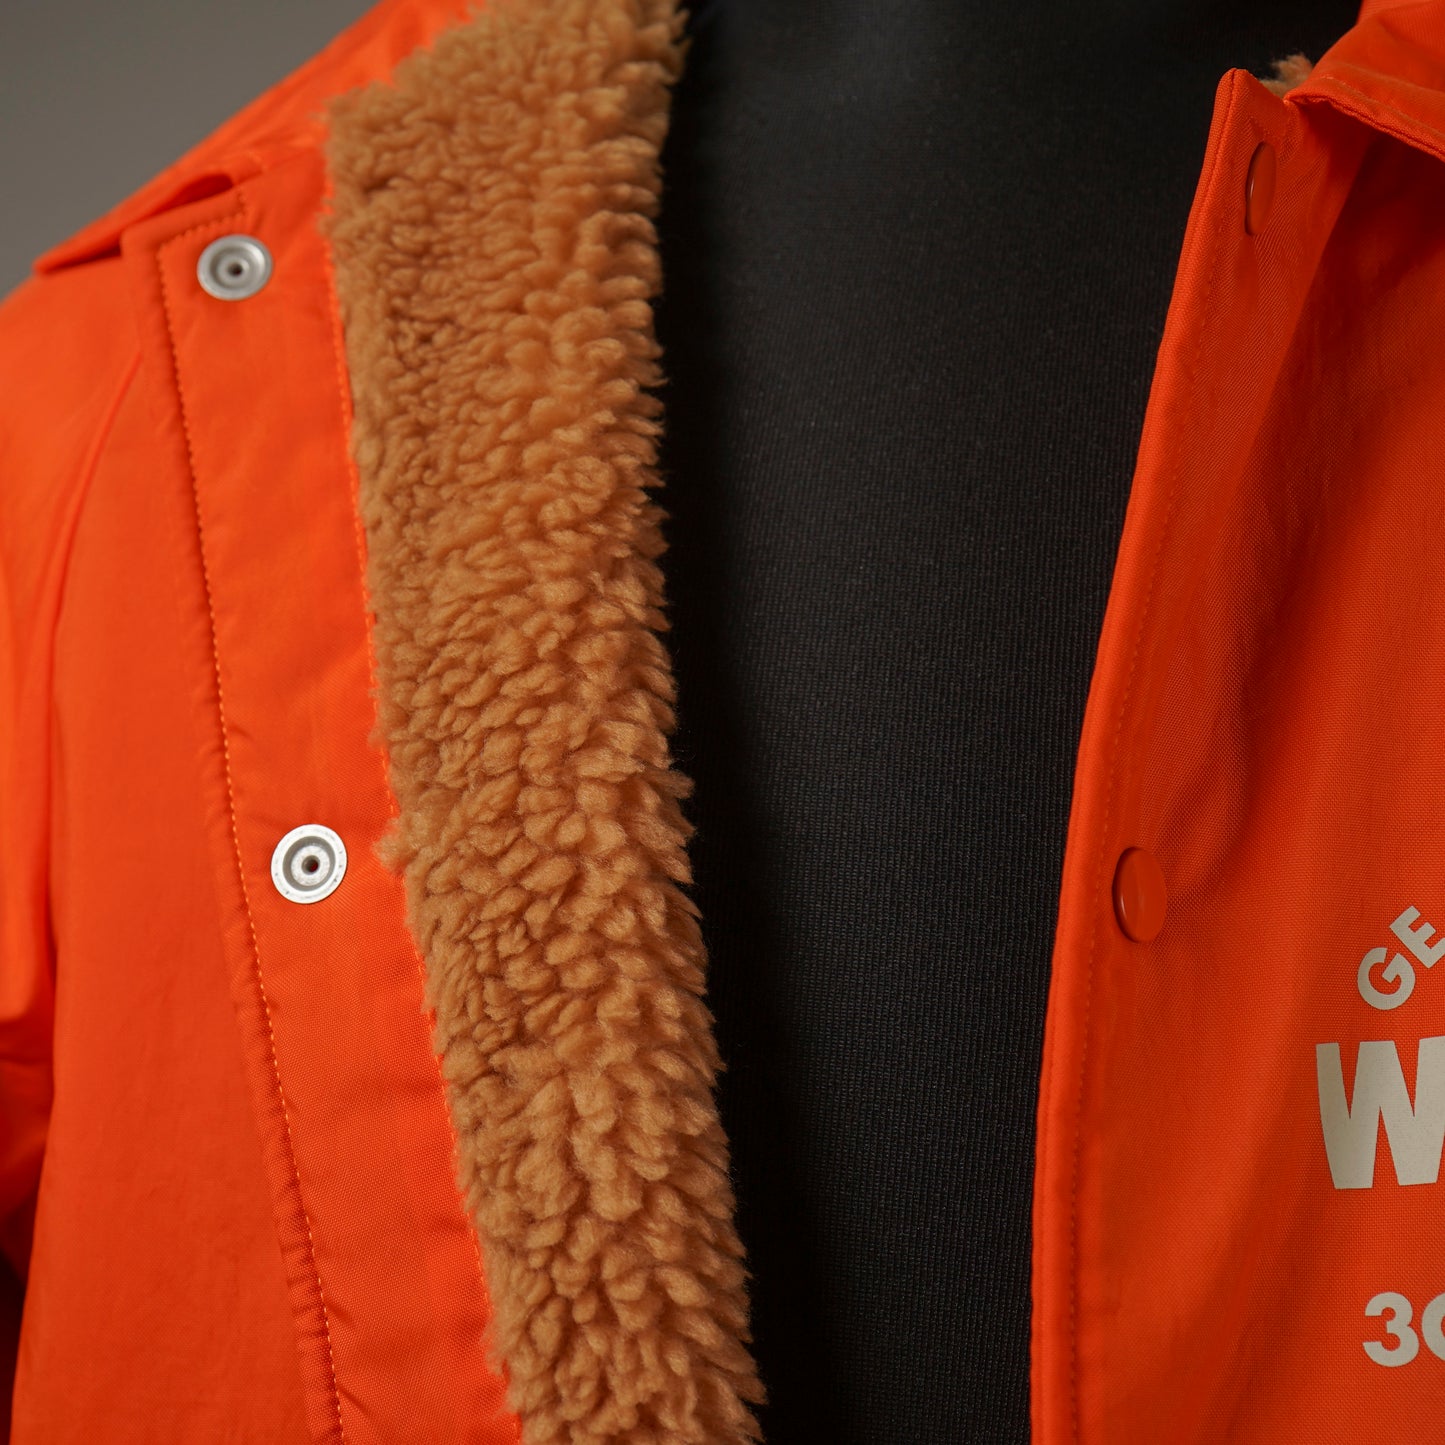 【AMERICAN WANNABE EXCLUSIVE】3000MILE - COACH JACKET / WRD-23-AW-06-AW